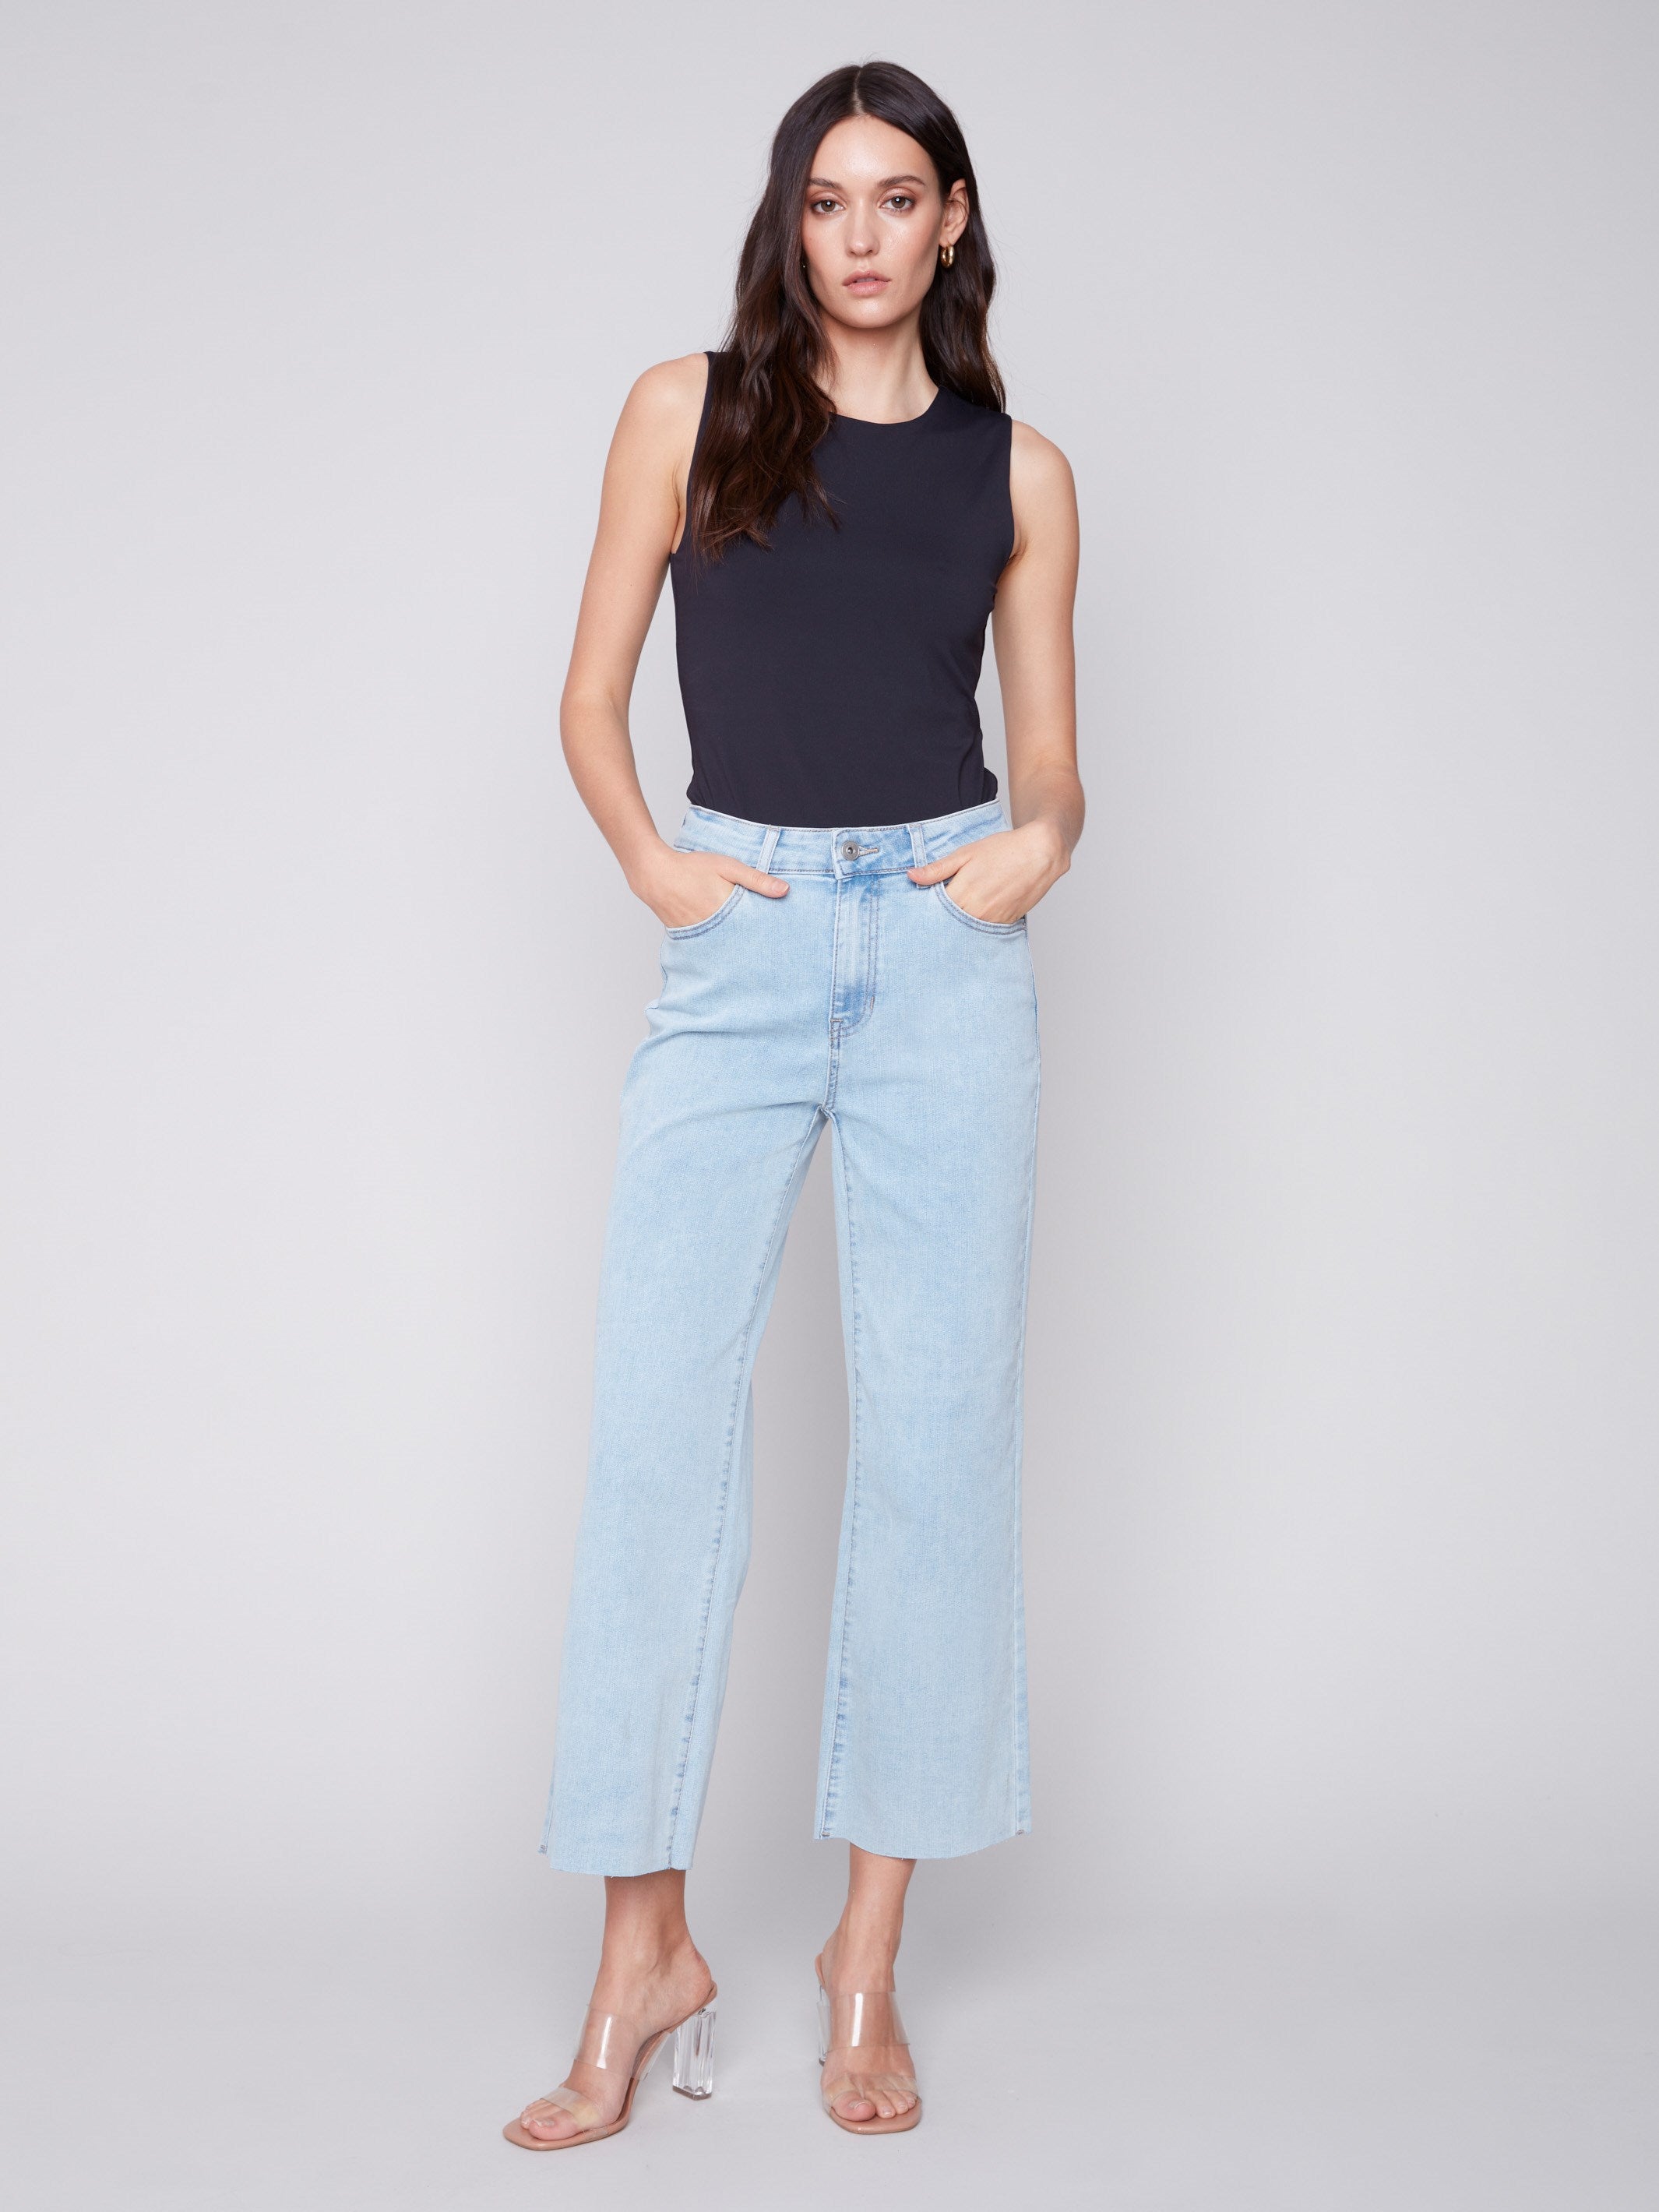 Flared Jeans with Raw Edge - Bleach Blue - Charlie B Collection Canada - Image 1